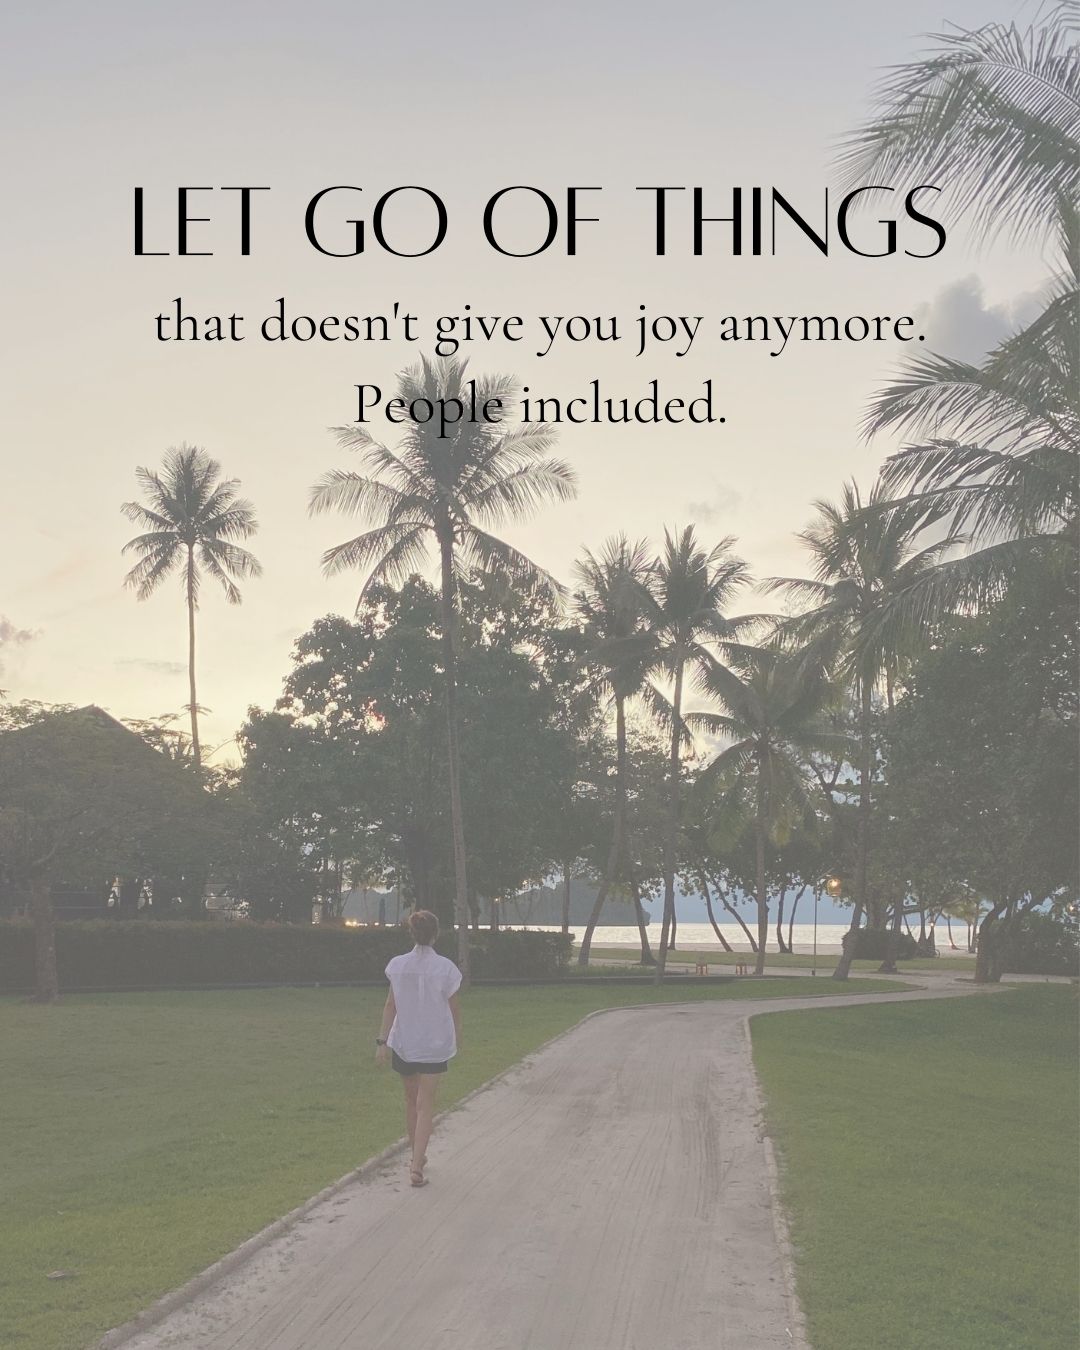 Let Go of Things